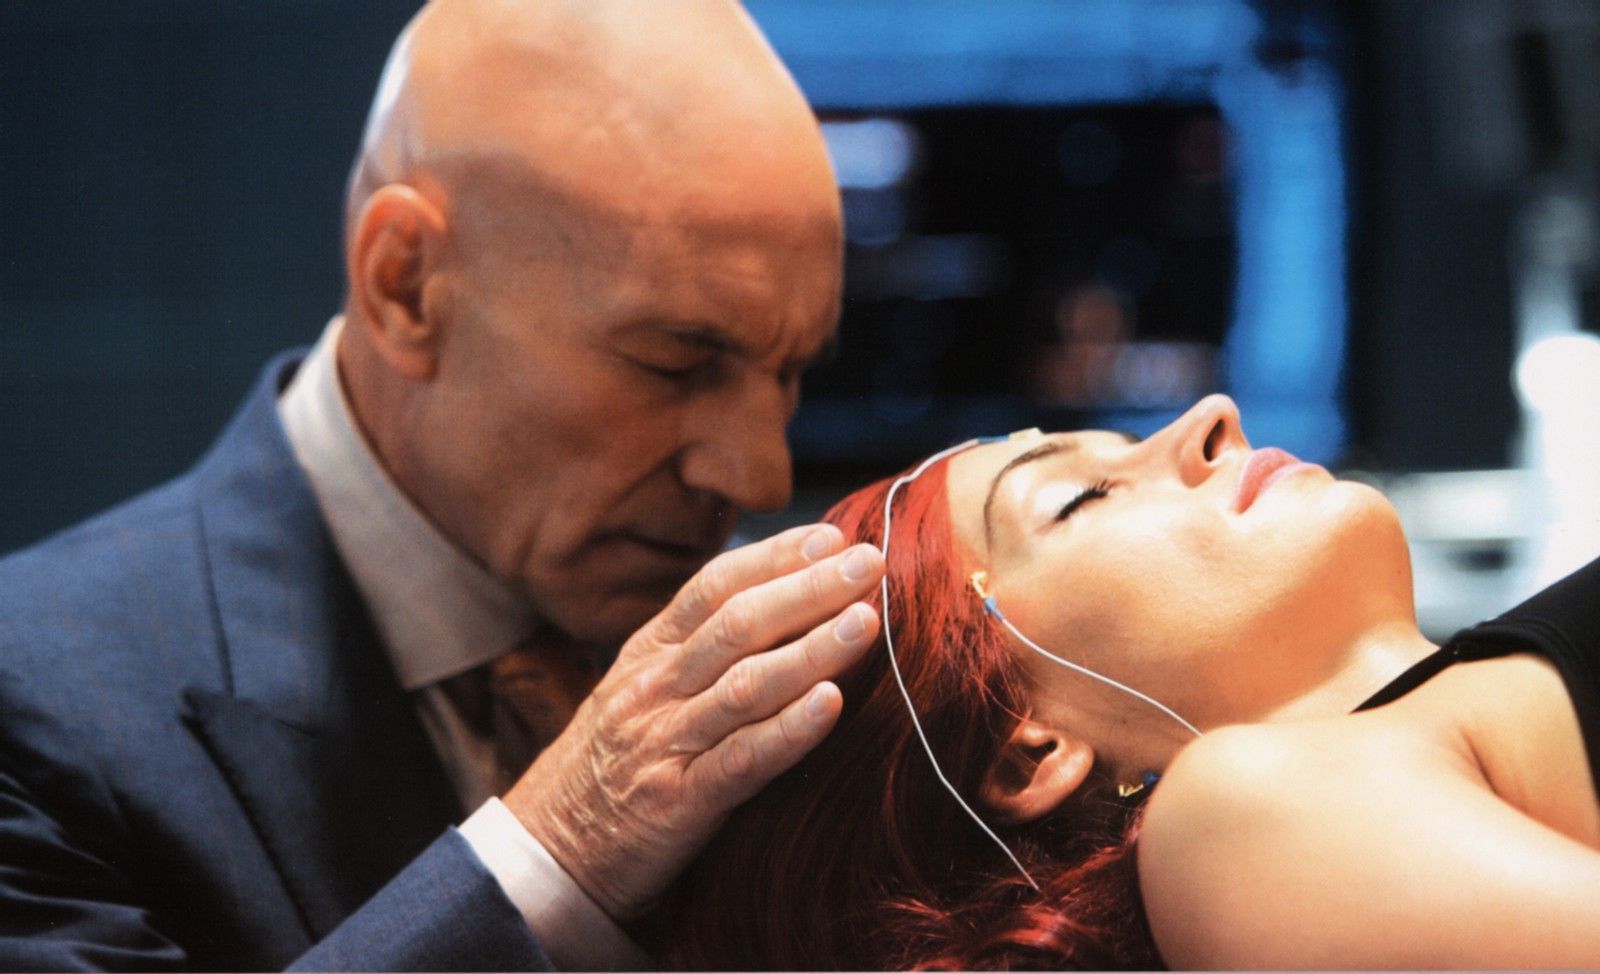 Professor Charles Xavier (Patrick Stewart) has his eyes closed as he places his hands on Jean Grey (Famke Janssen)'s temple.